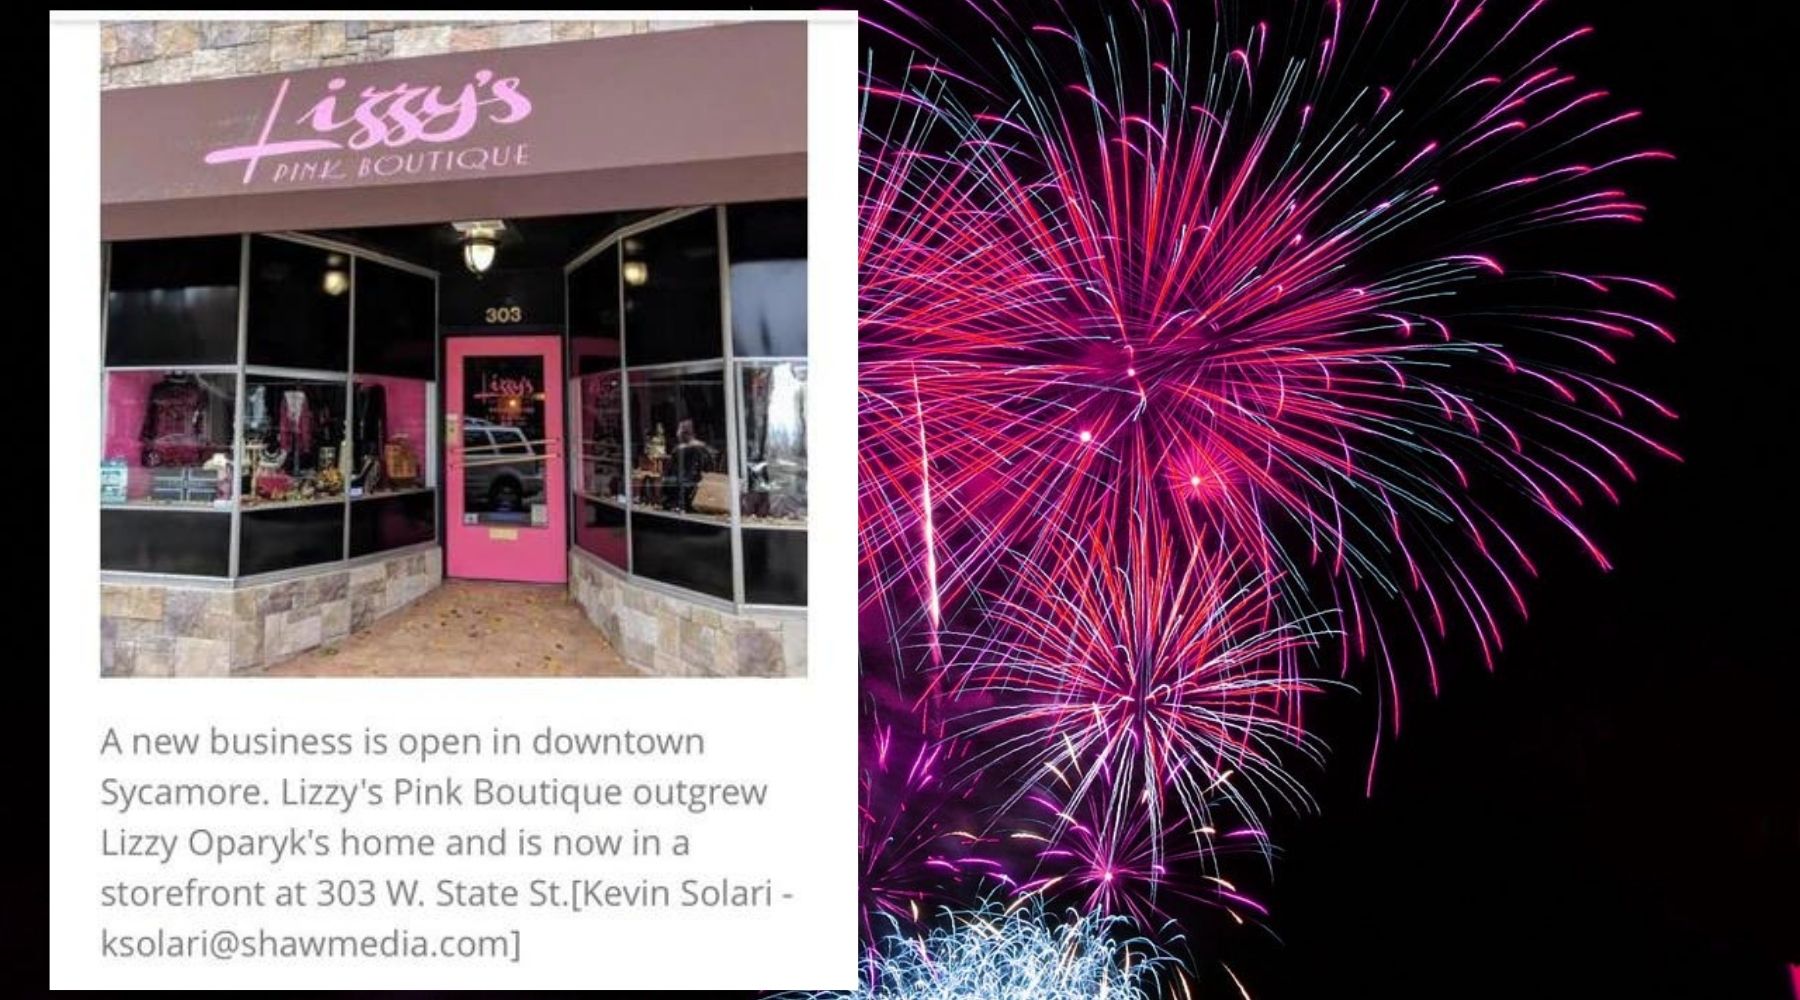 Lizzy's Pink Boutique moves to Sycamore storefront